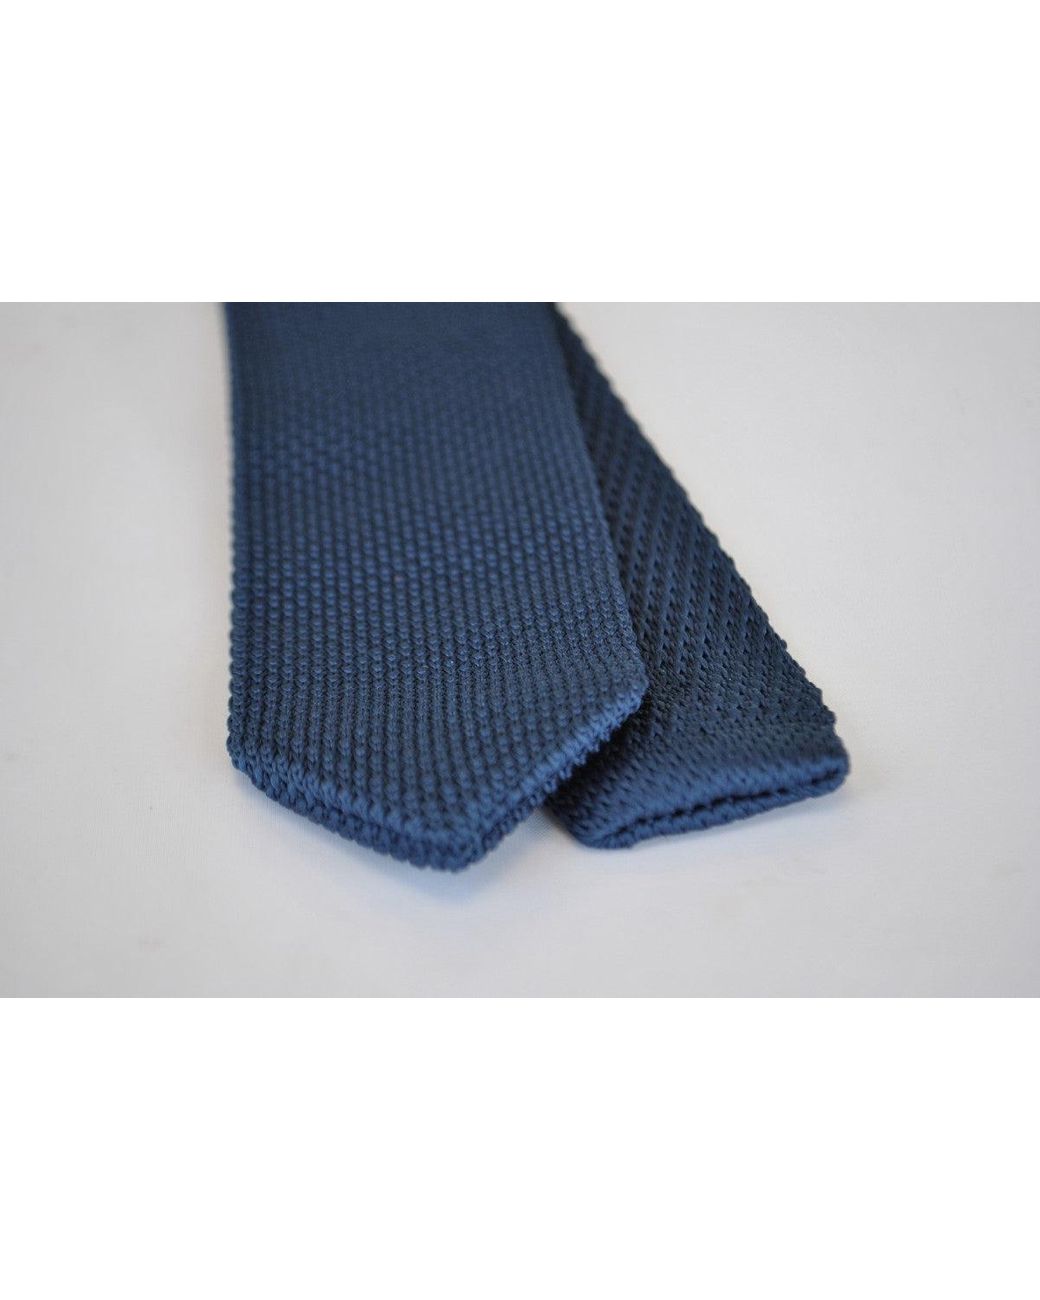 Frederick Thomas navy blue skinny knitted tie with ivory cream tip FT2023 